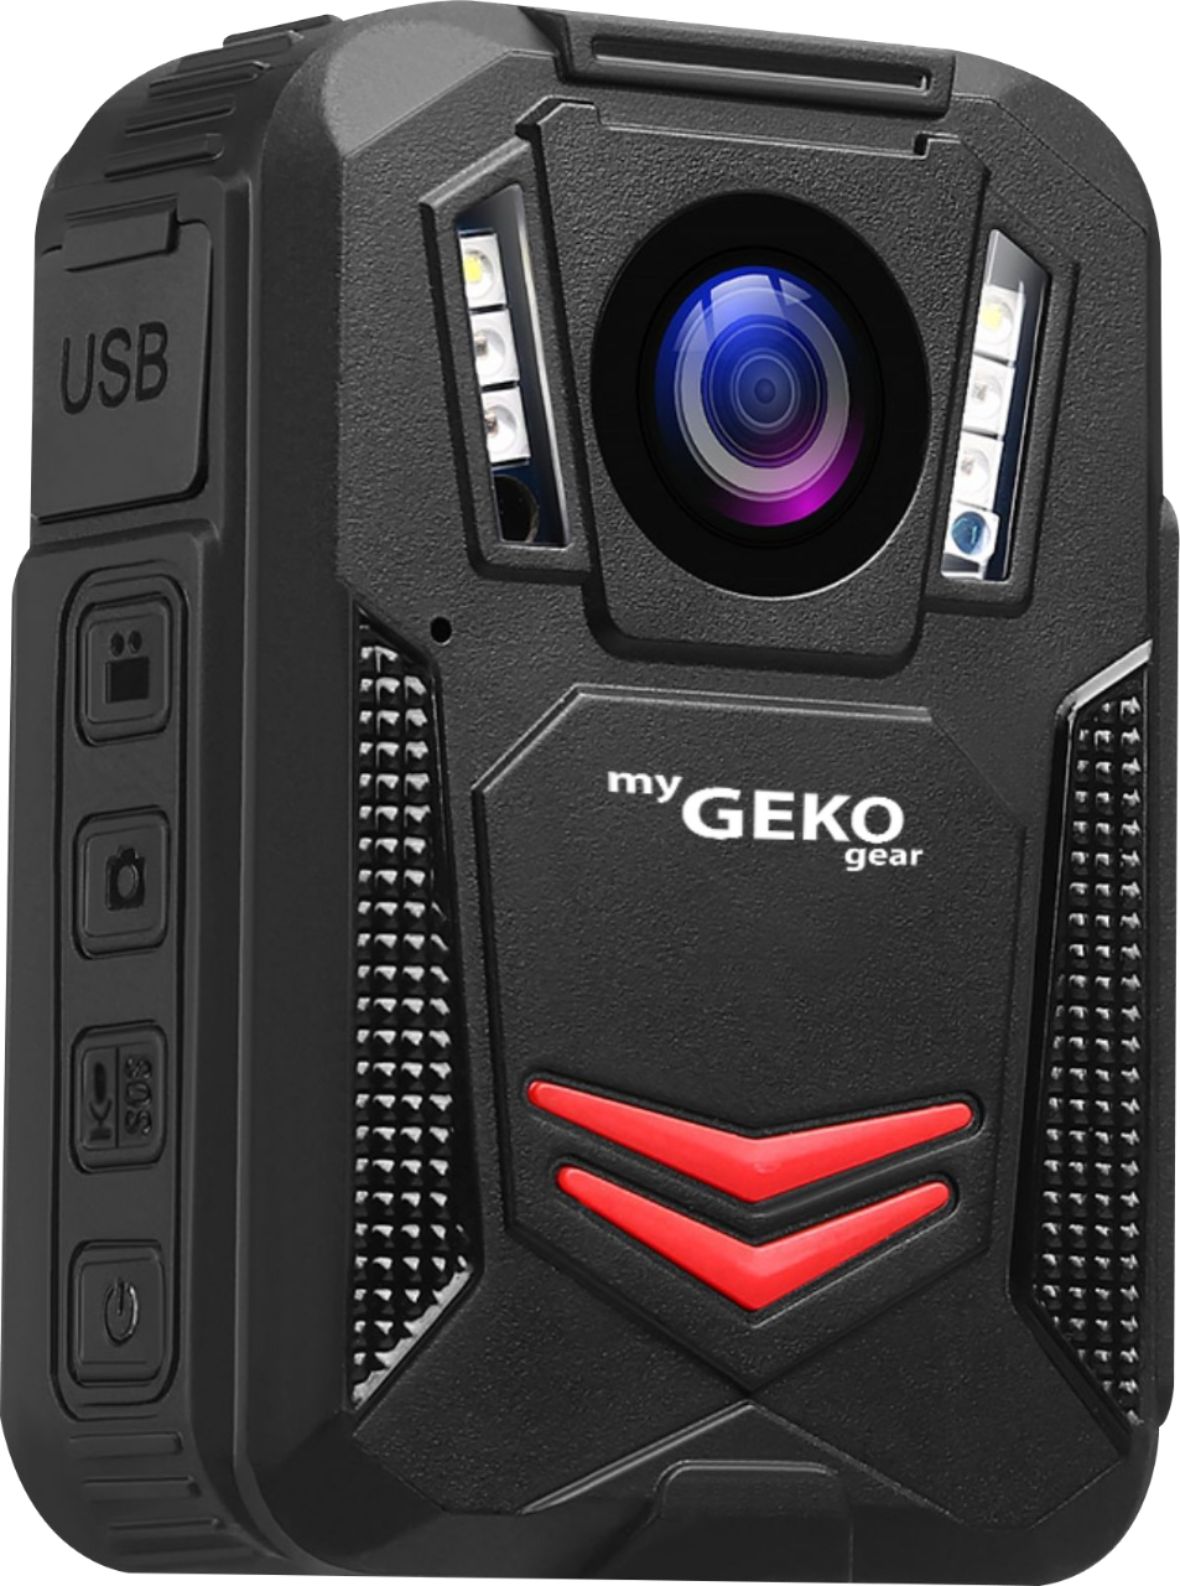 Angle View: myGEKOgear - Aegis 300 1440p Body Camera Infrared Lights Water Resistance Password Protected GPS & Wi-Fi (Two Batteries)